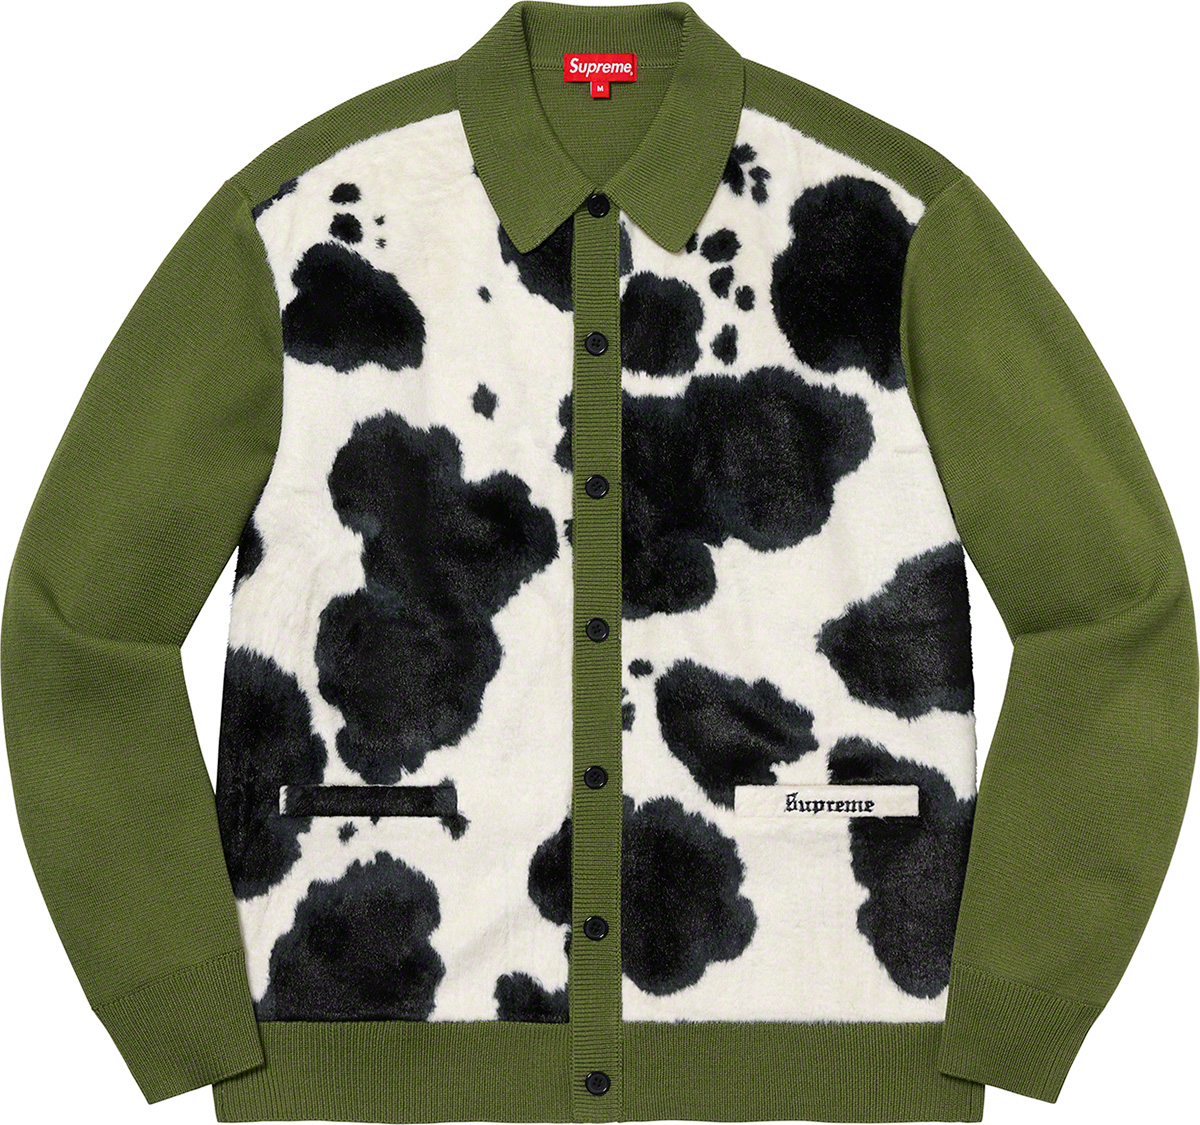 Three Kinds Of Cow Print: Which One Will Take Advantage Of Money?